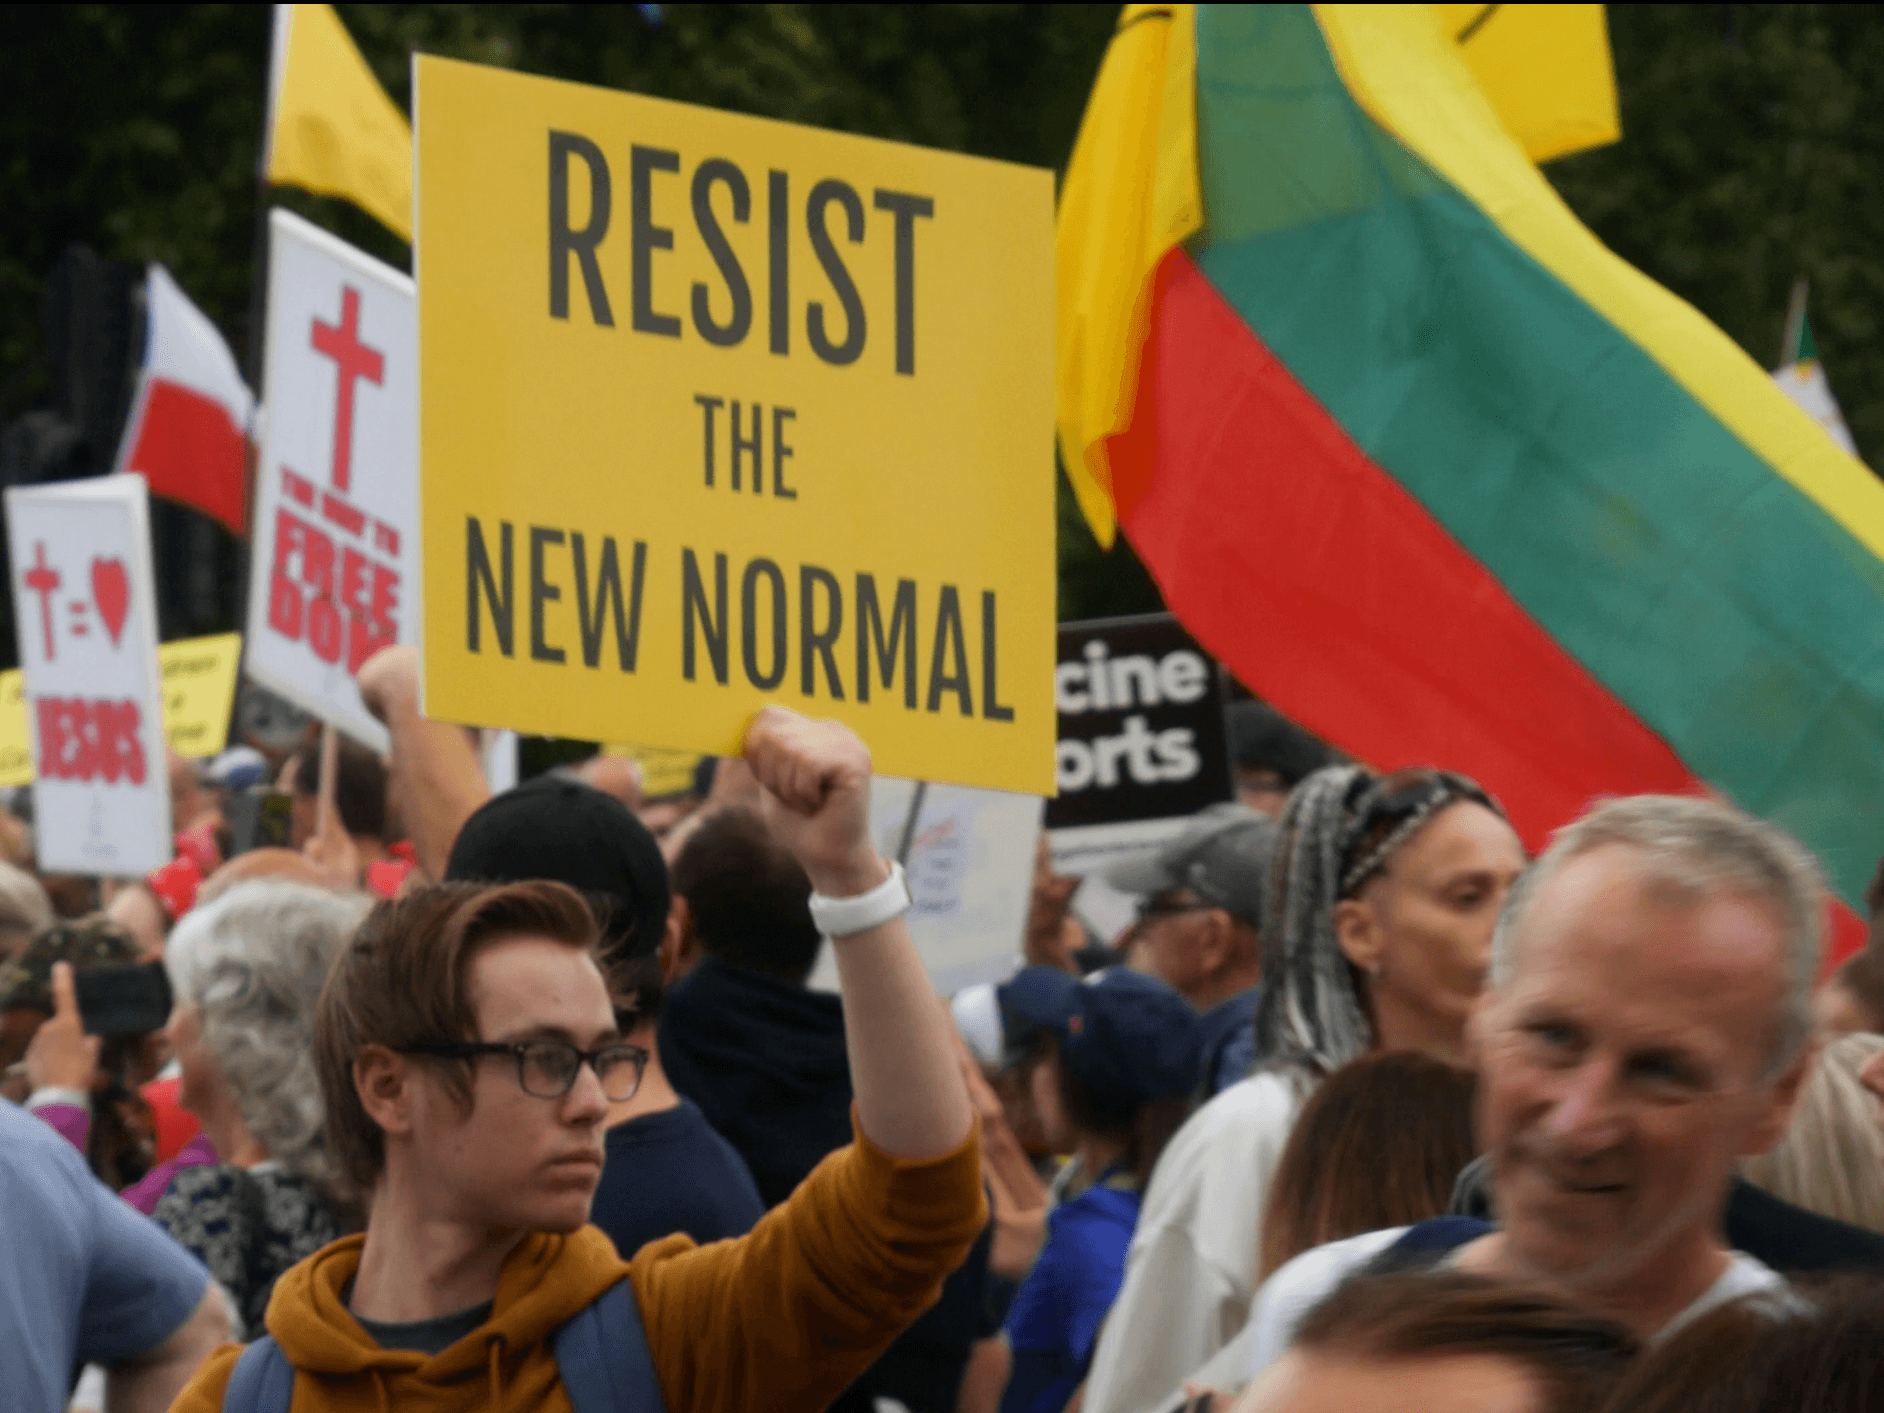 A protester is seen carrying a placard reading "Resist the New Normal" at a protest against vaccine passports in London. September 25th, 2021. Kurt Zindulka, Breitbart News